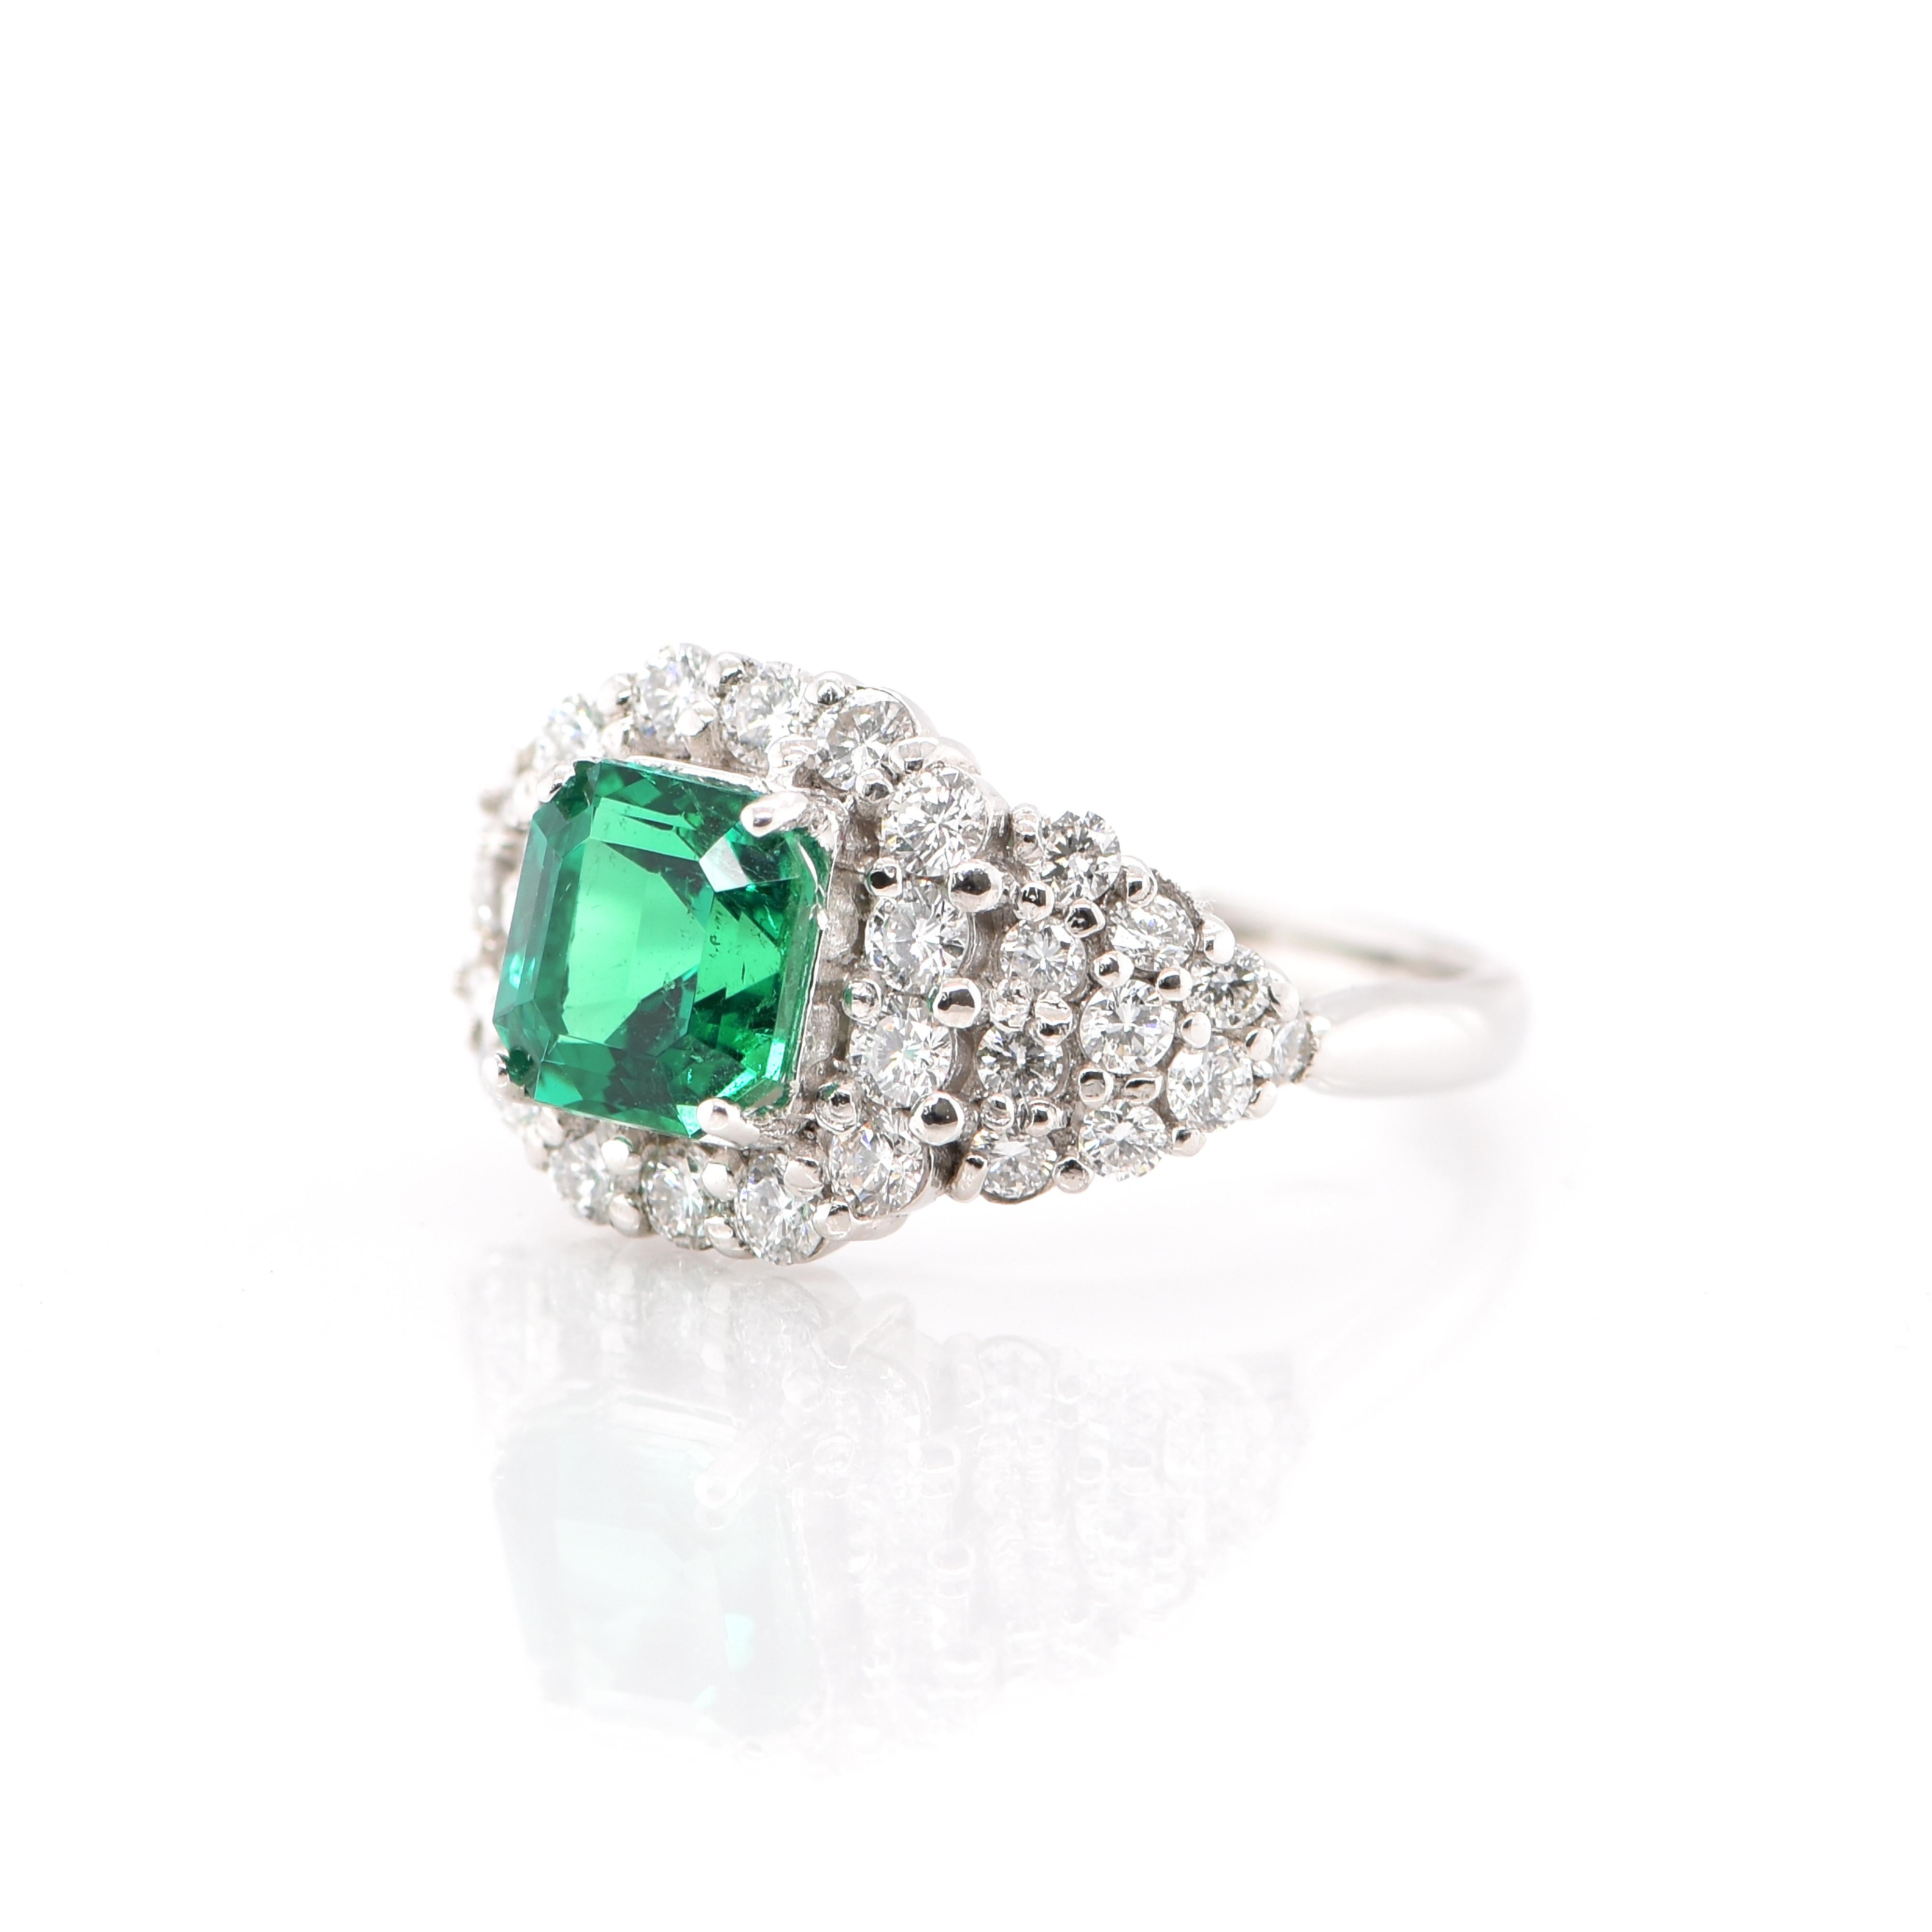 A stunning Engagement Ring featuring a GIA Certified 1.39 Carat Natural, Colombian, only minority enhanced Emerald (GIA #3335792200) and 0.85 Carats of Diamond Accents set in Platinum. The Emerald is eye clean and displays beautiful color! People